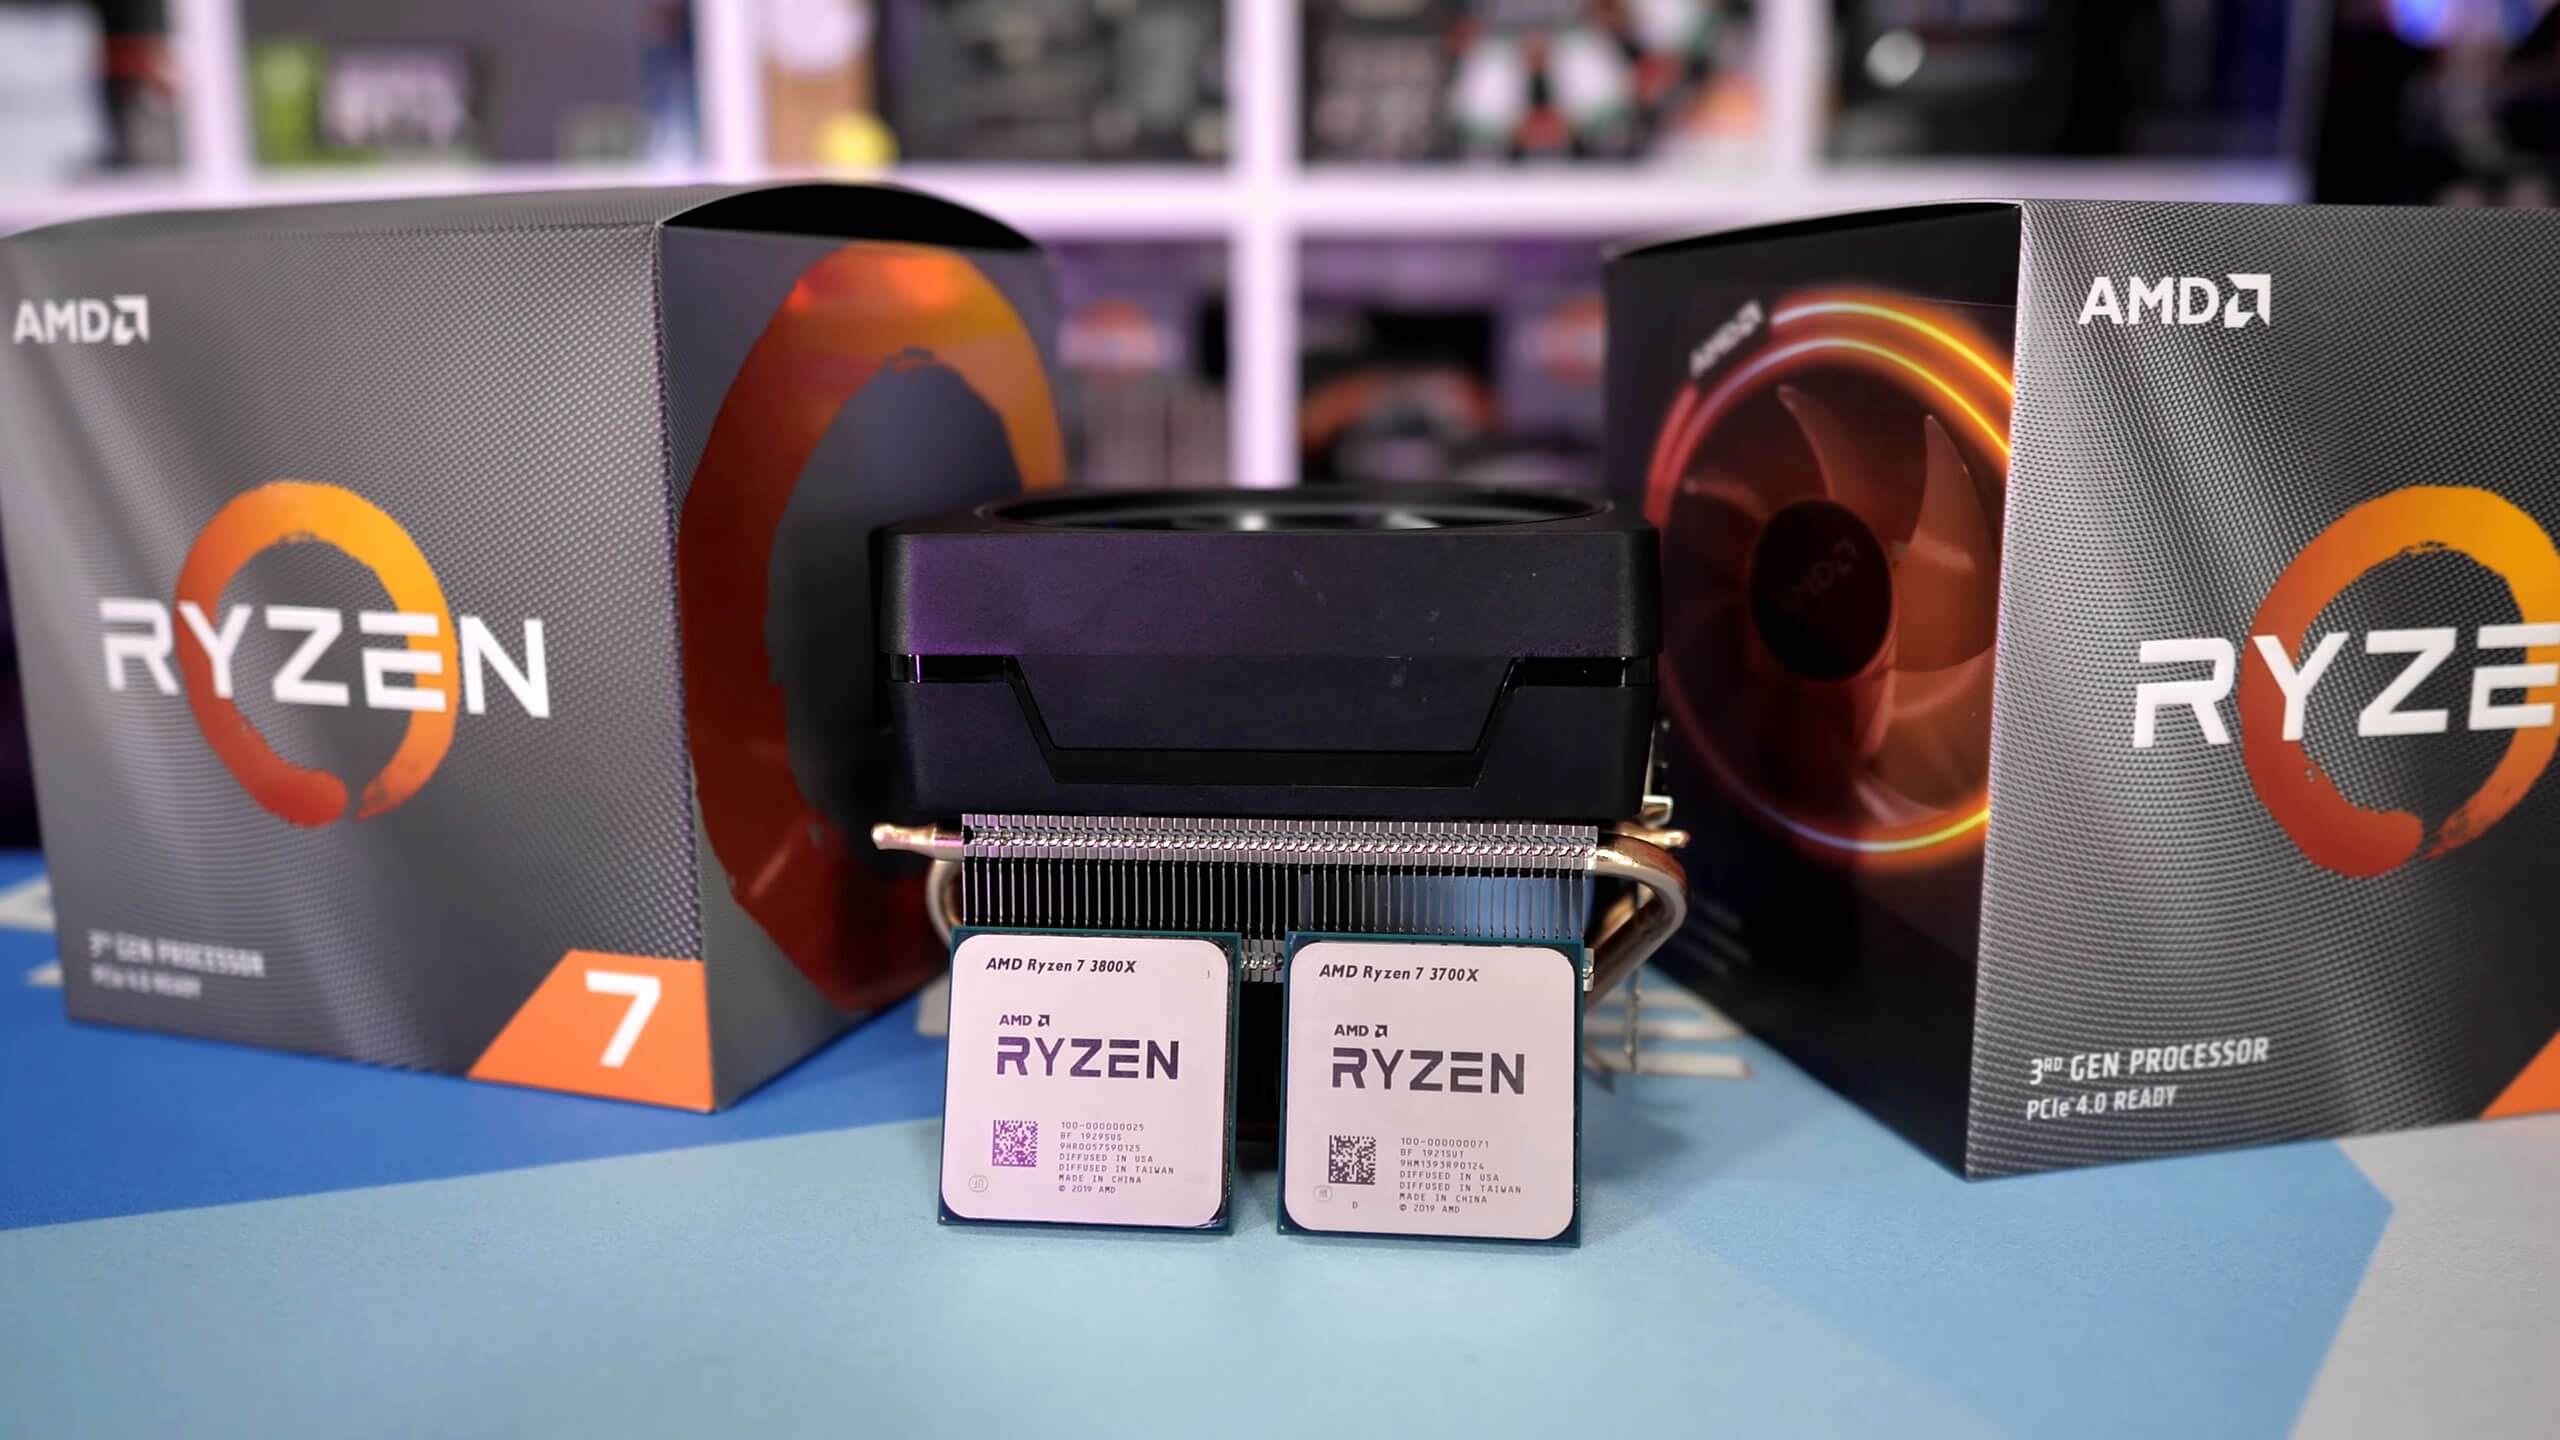 AMD Ryzen 7 3800X vs. 3700X: What's the Difference? | TechSpot